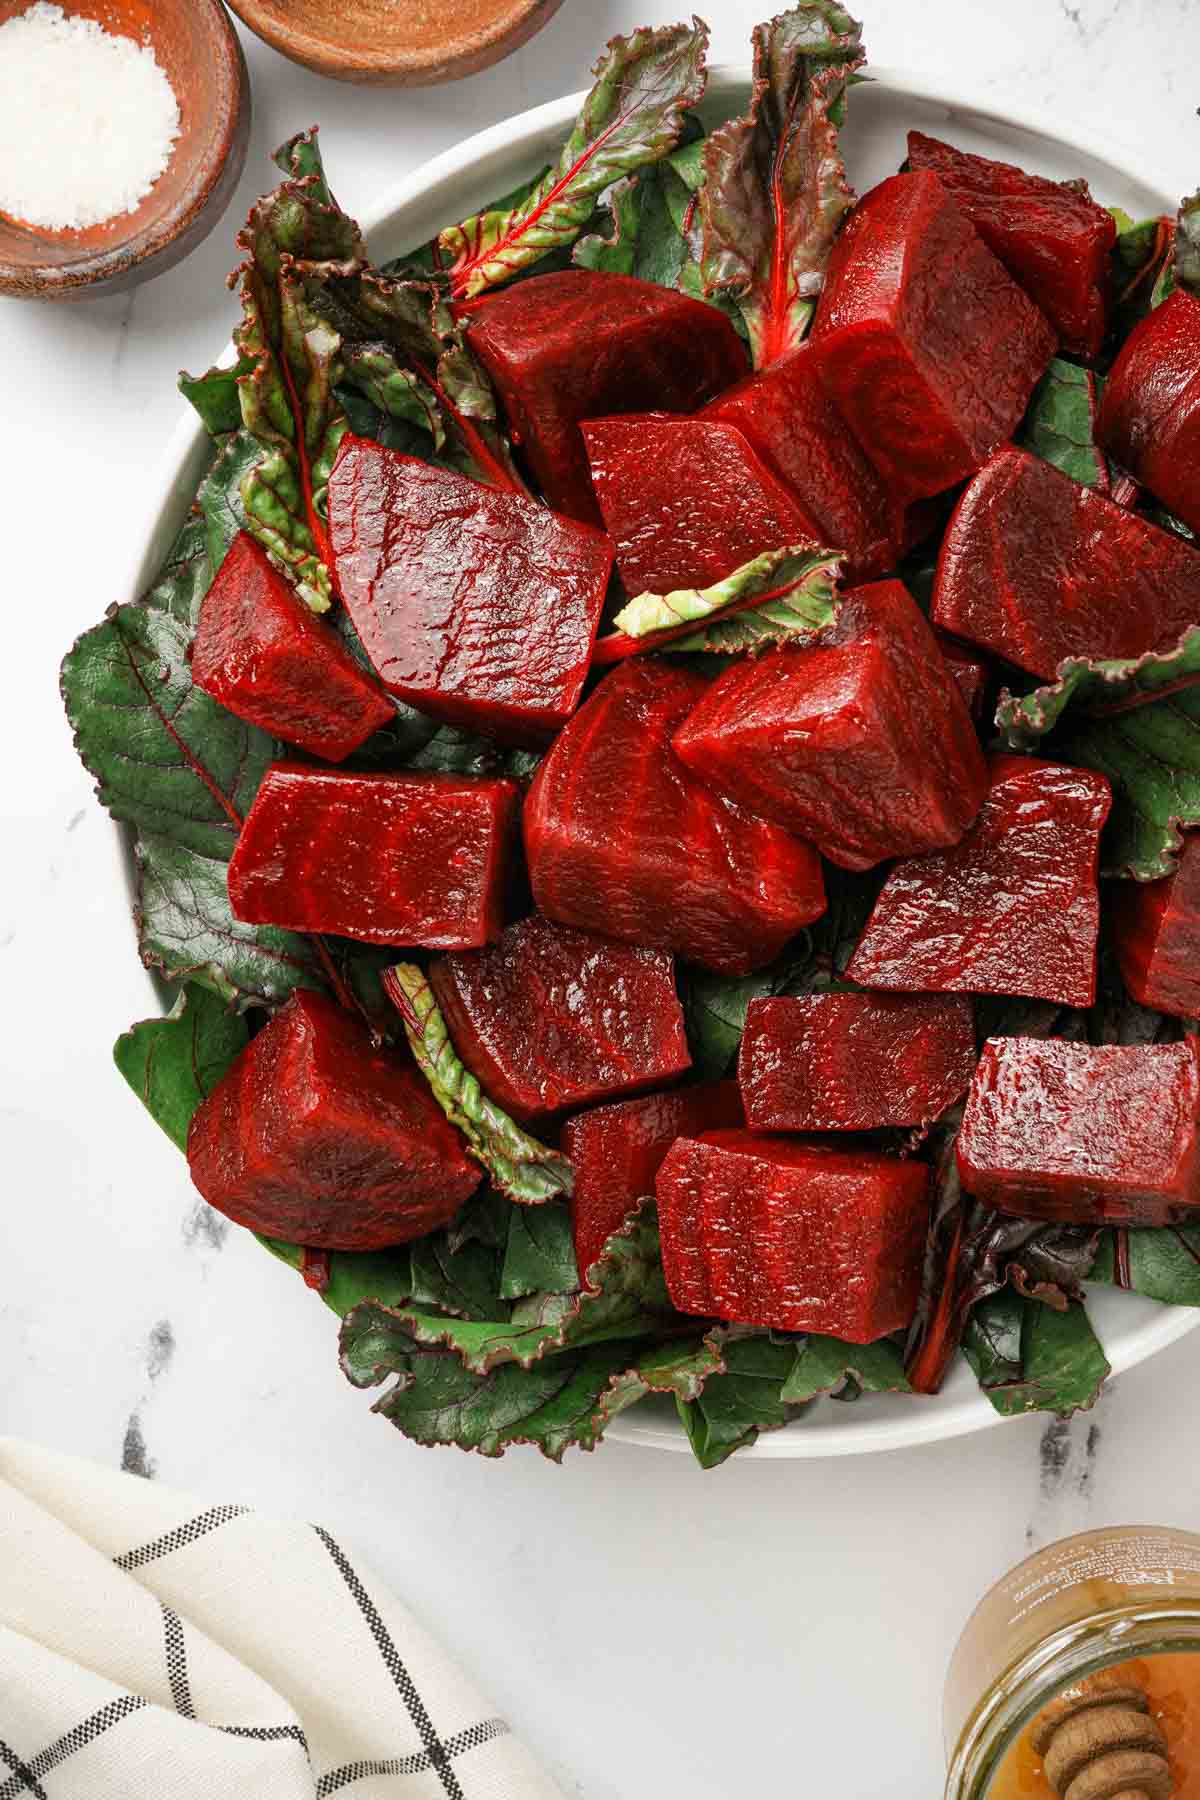 cut up red beets on a plate with greens